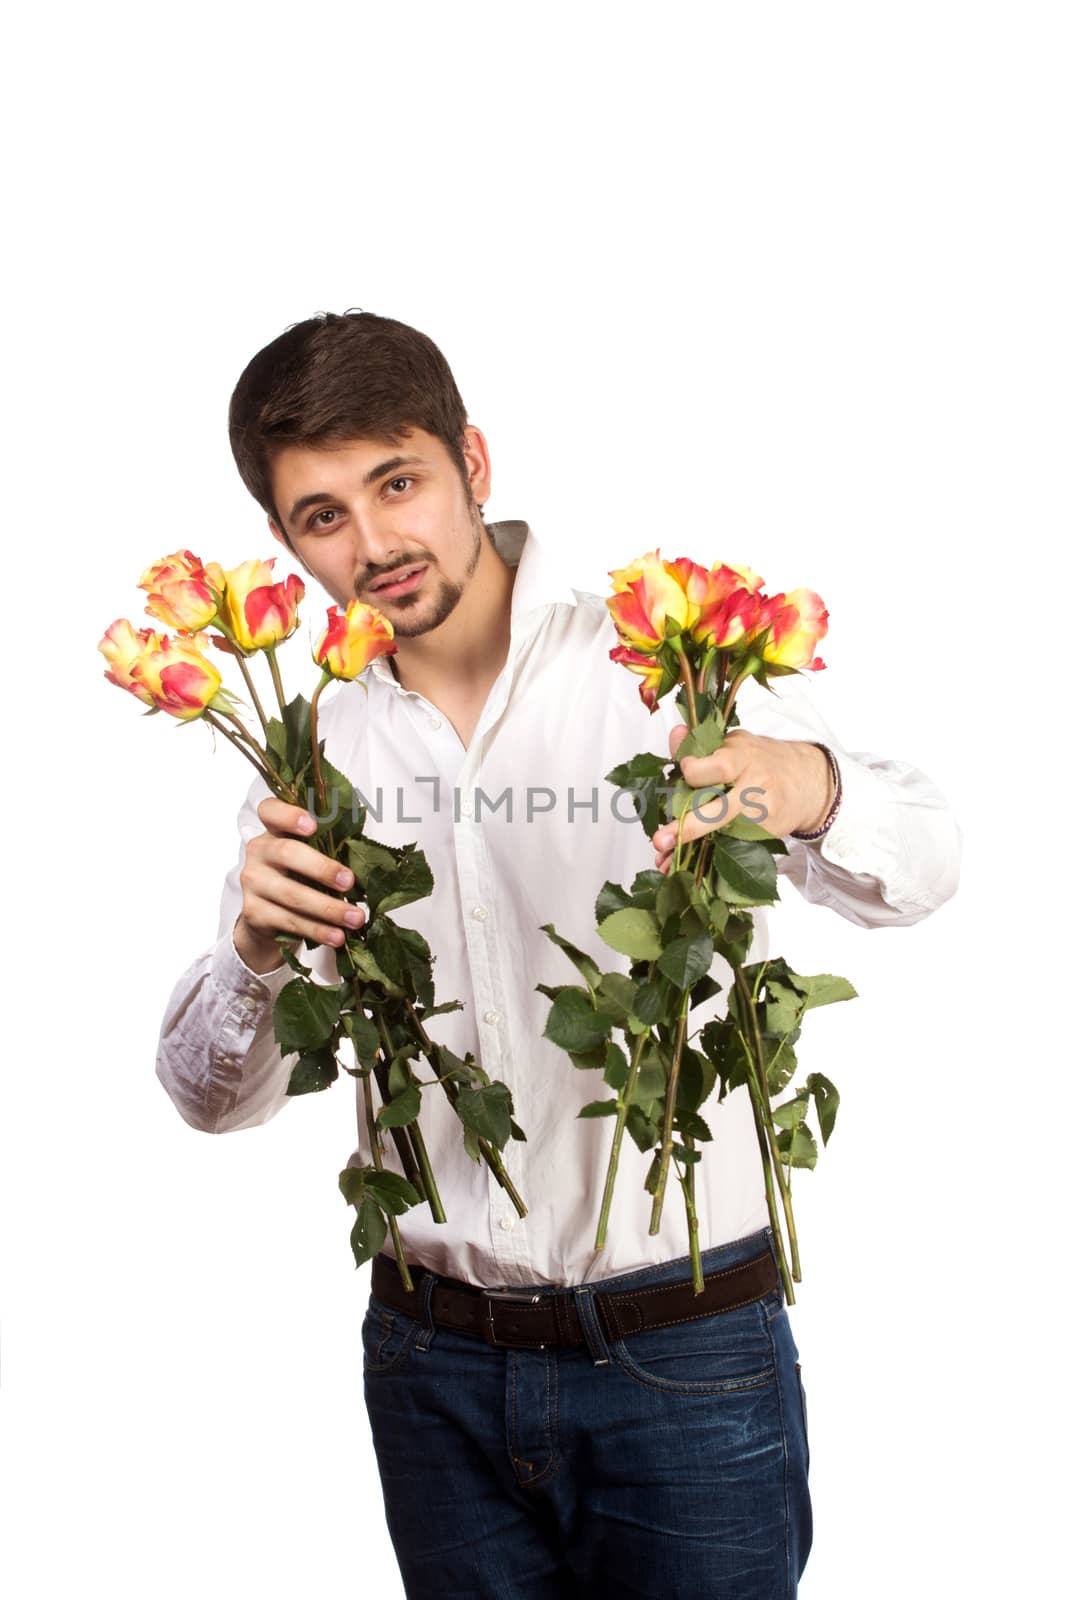 Man with bouquet of red roses. by gsdonlin